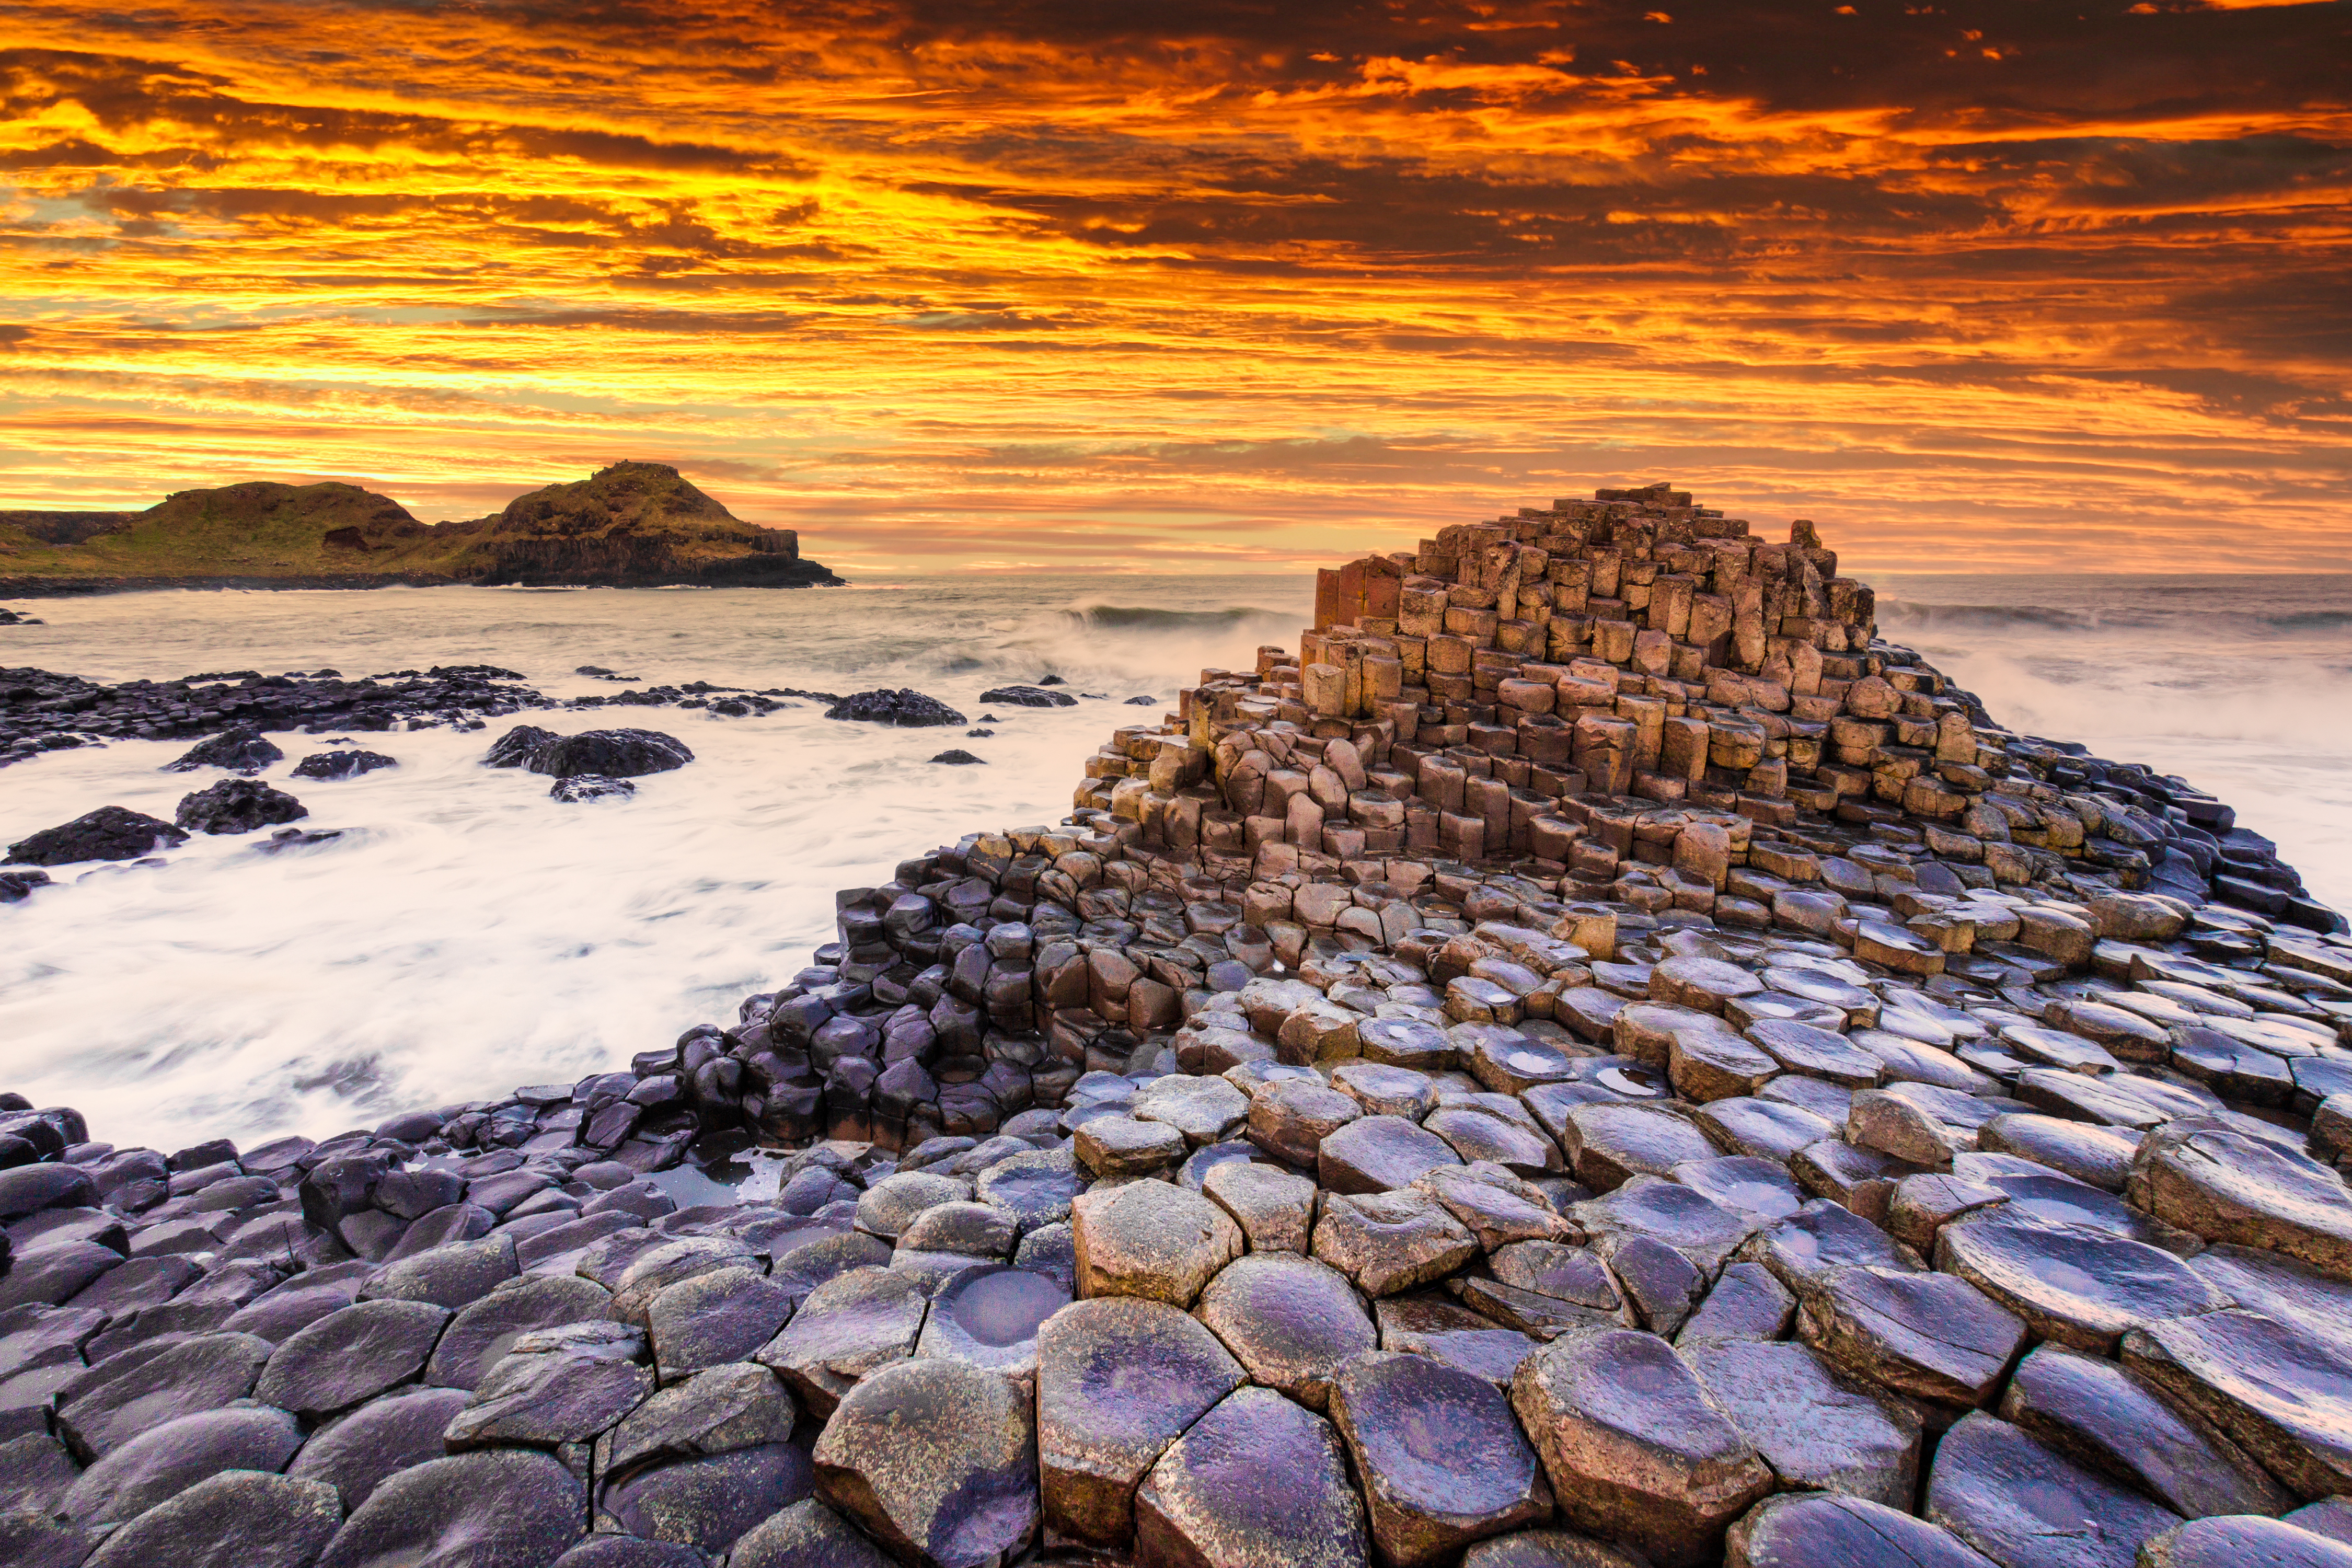 7 Extraordinary Days Exploring During a Family Vacation in Northern Ireland - Giant's Causeway in Northern Ireland